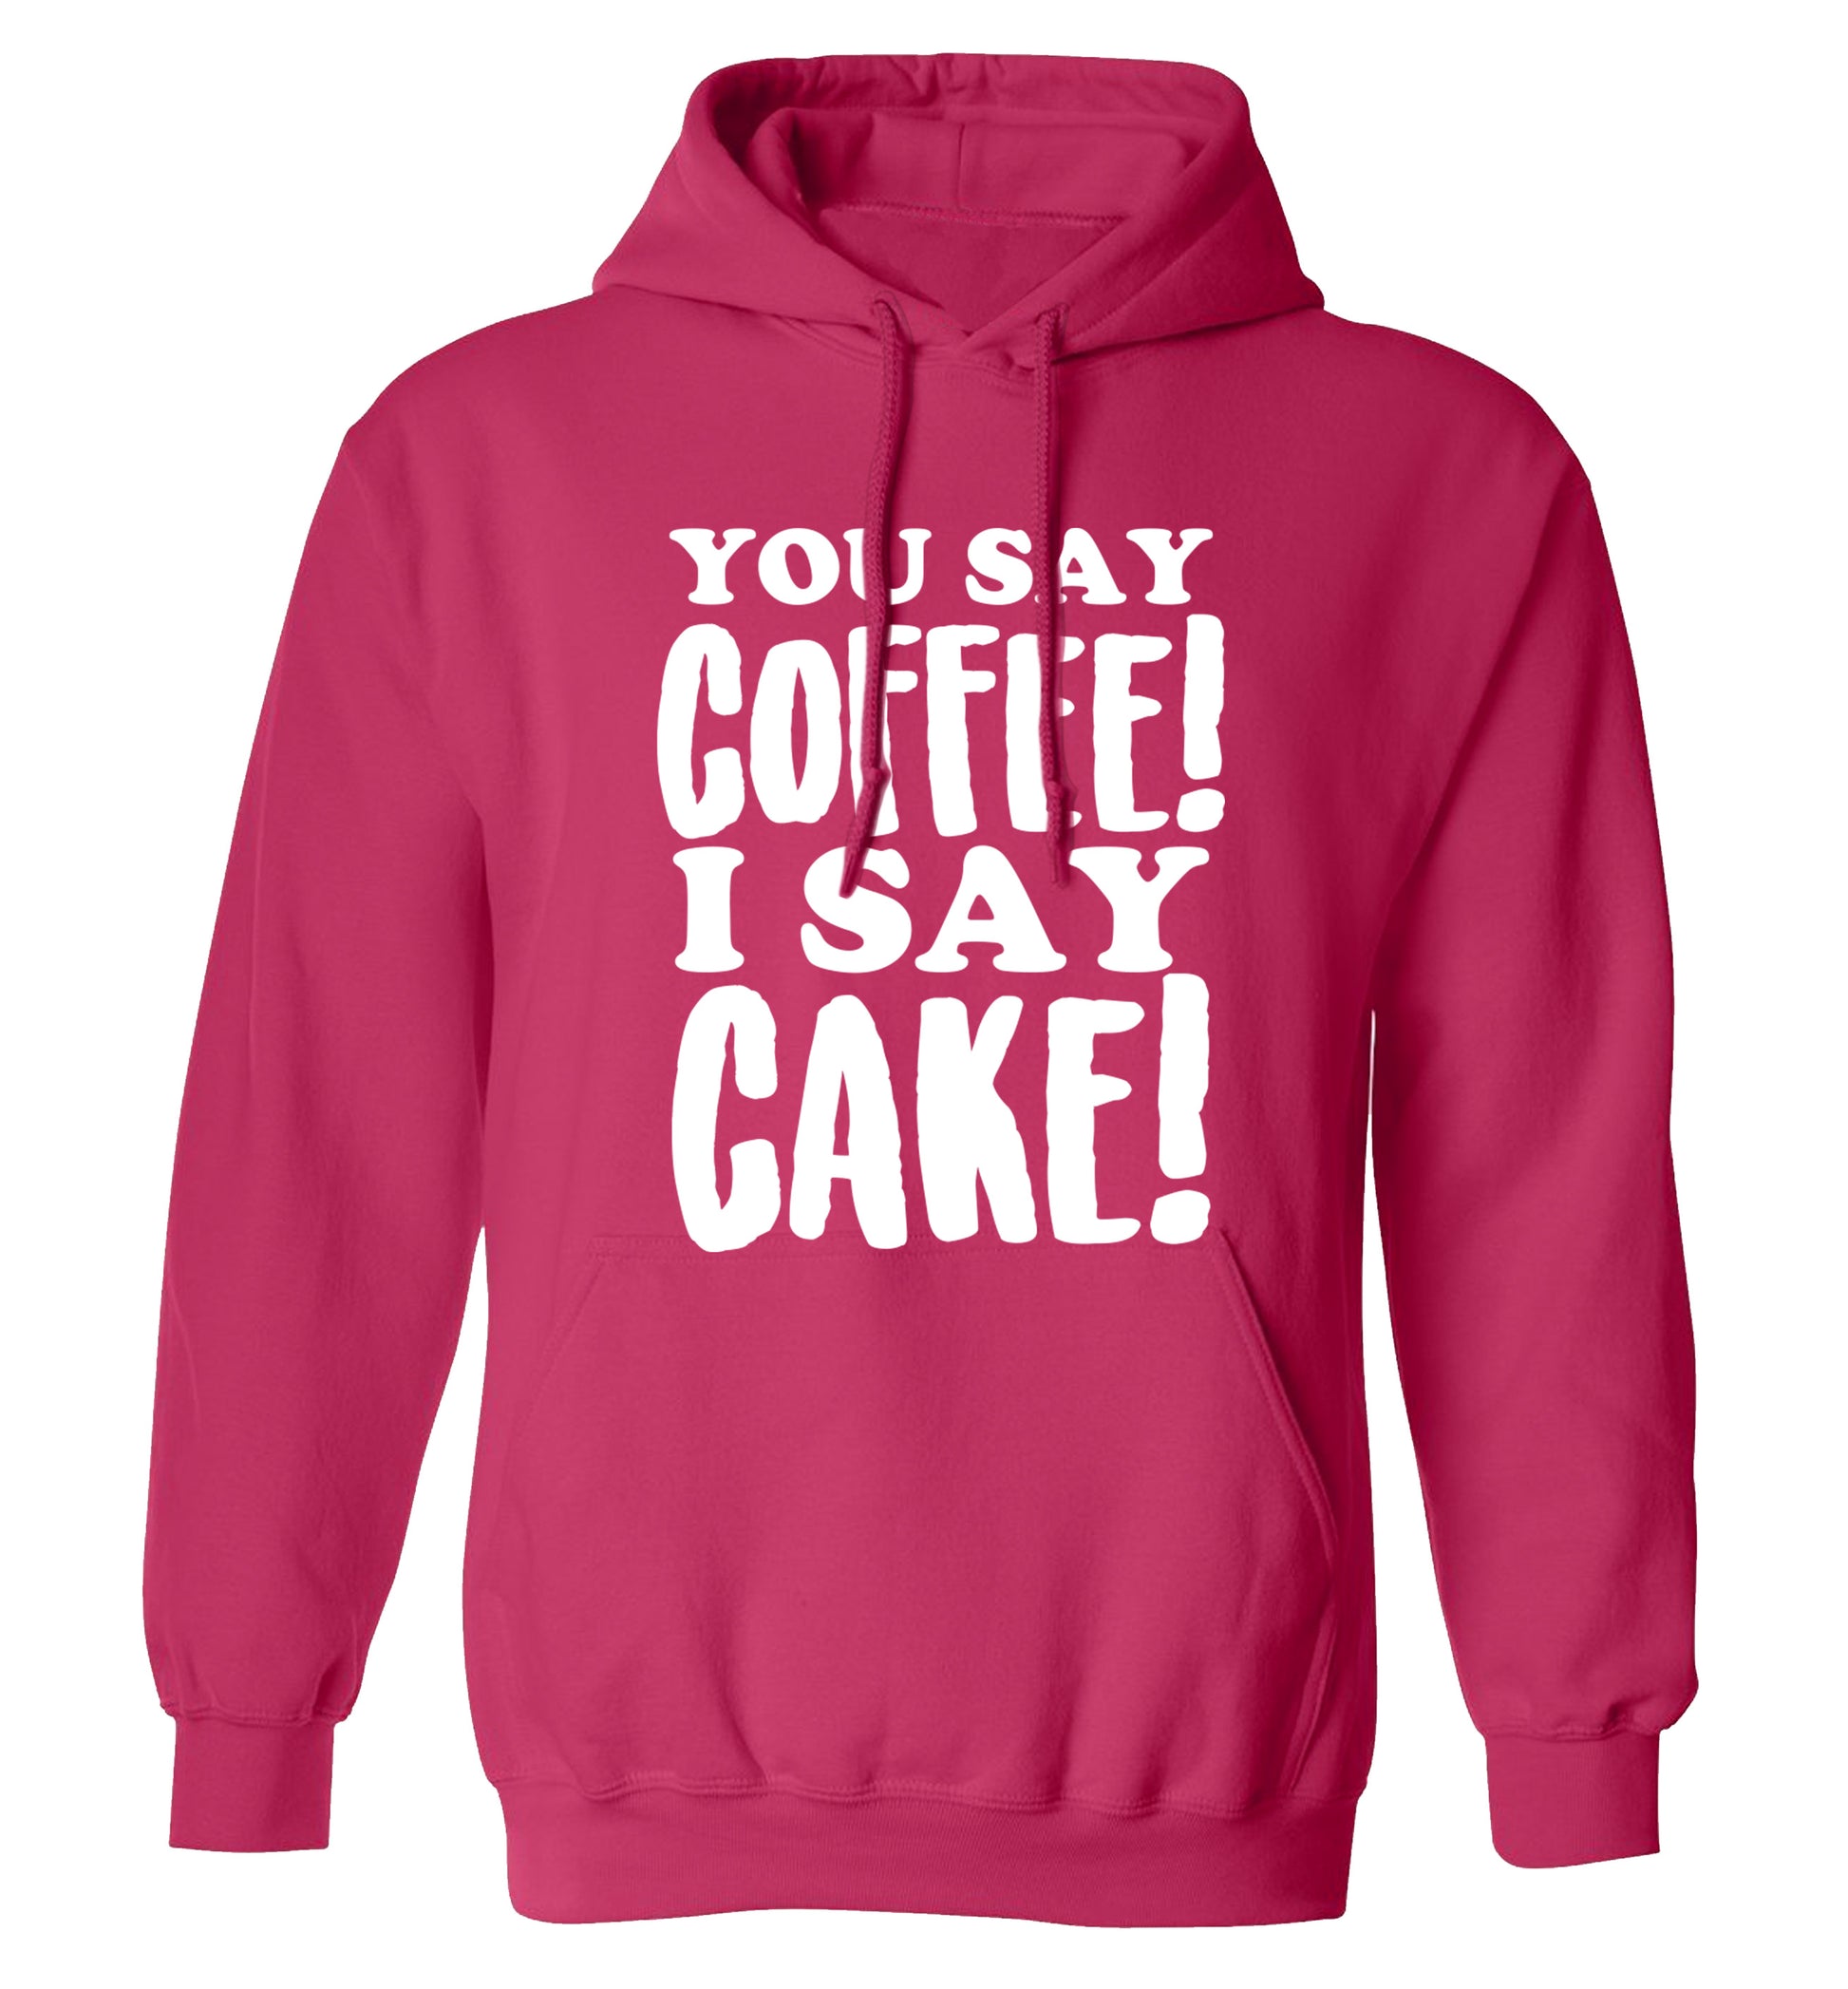 You say coffee I say cake! adults unisex pink hoodie 2XL